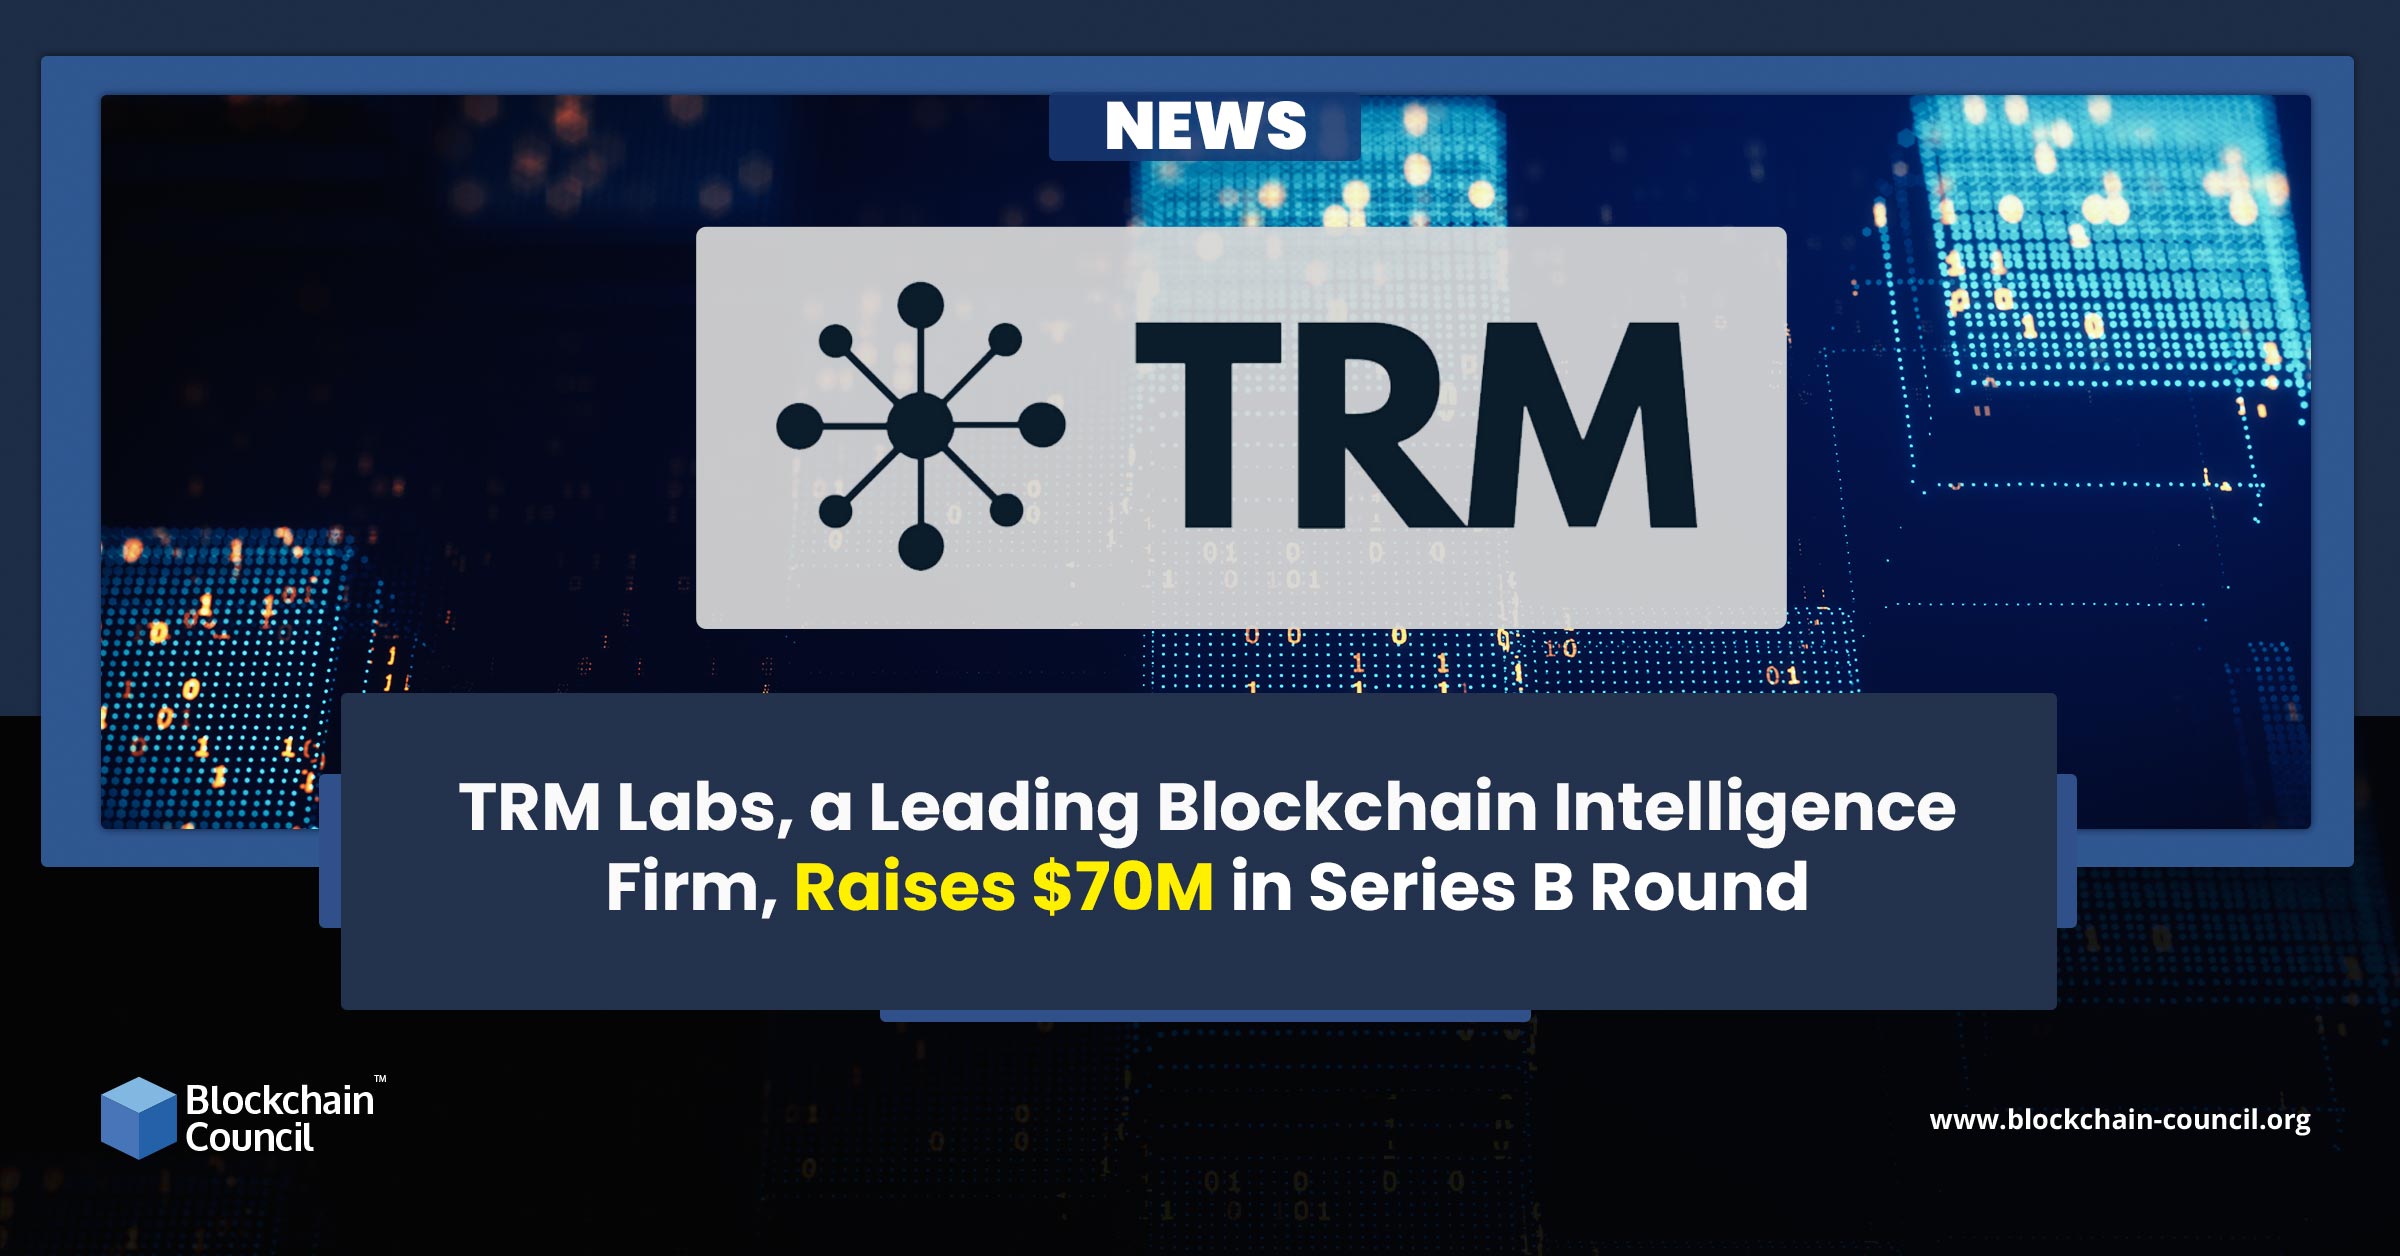 TRM Labs, a Leading Blockchain Intelligence Firm, Raises $70M in Series B Round